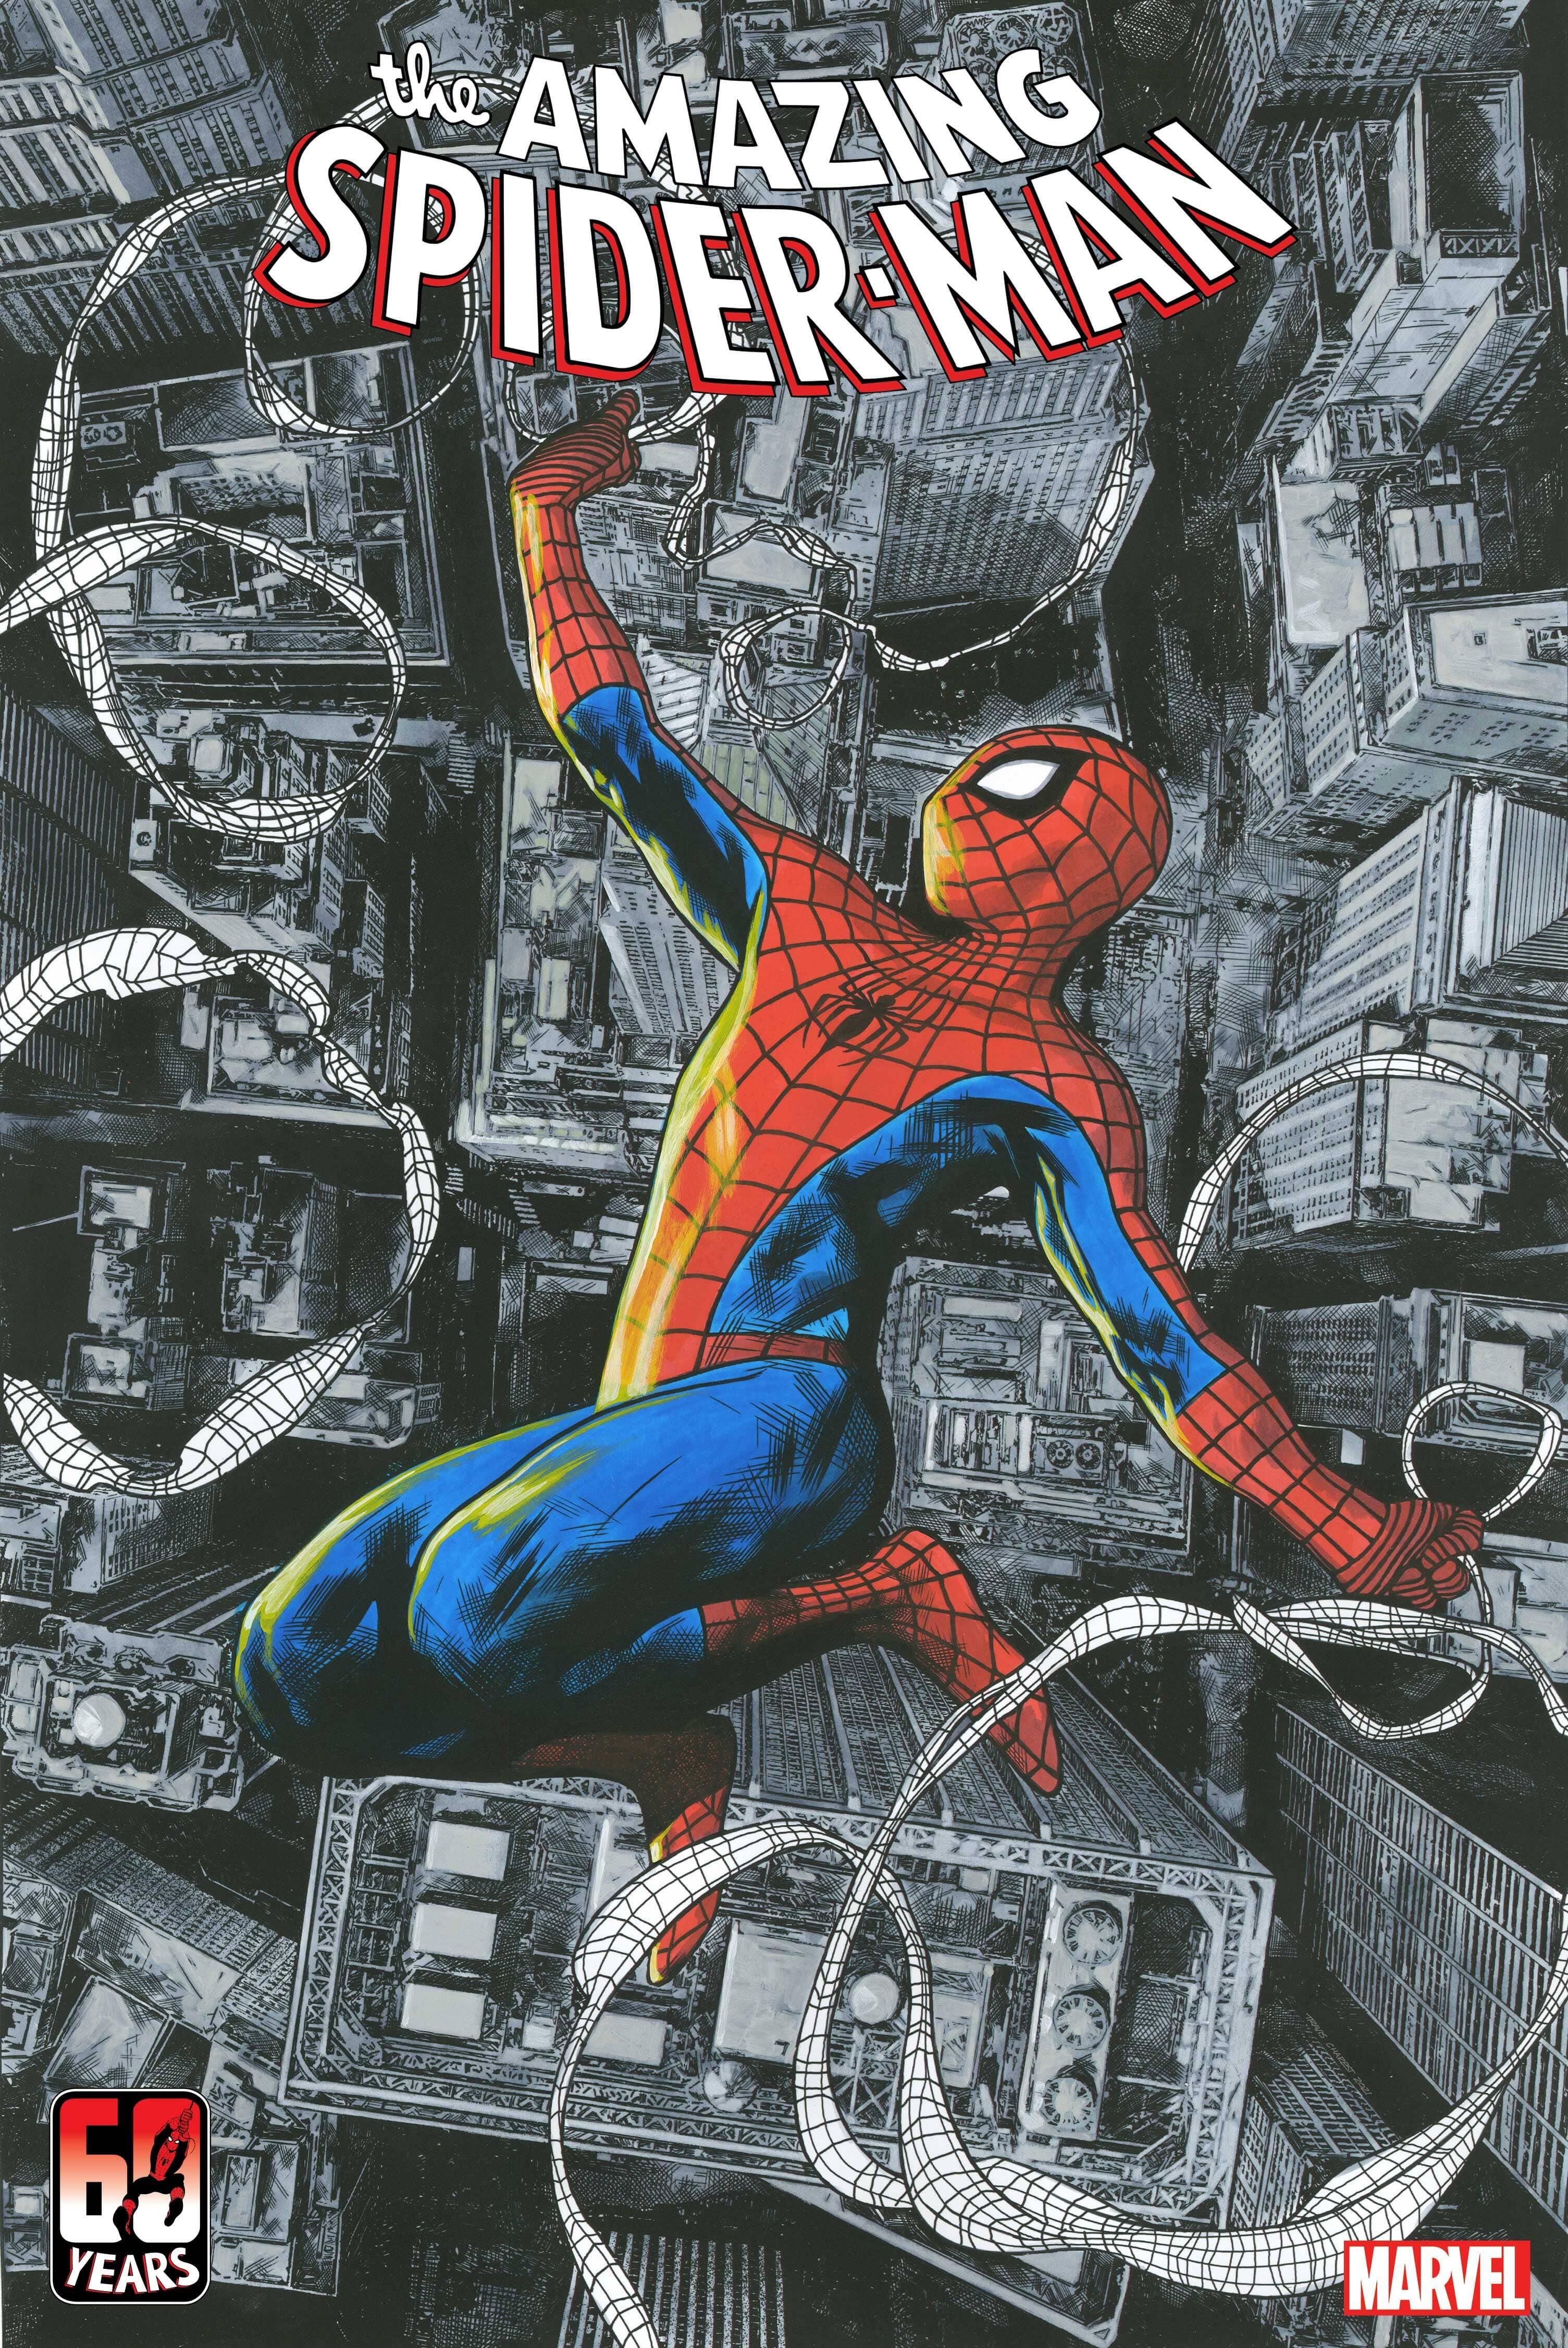 Peter Parker on the cover of Amazing Spider-Man 1 by Travis Charest